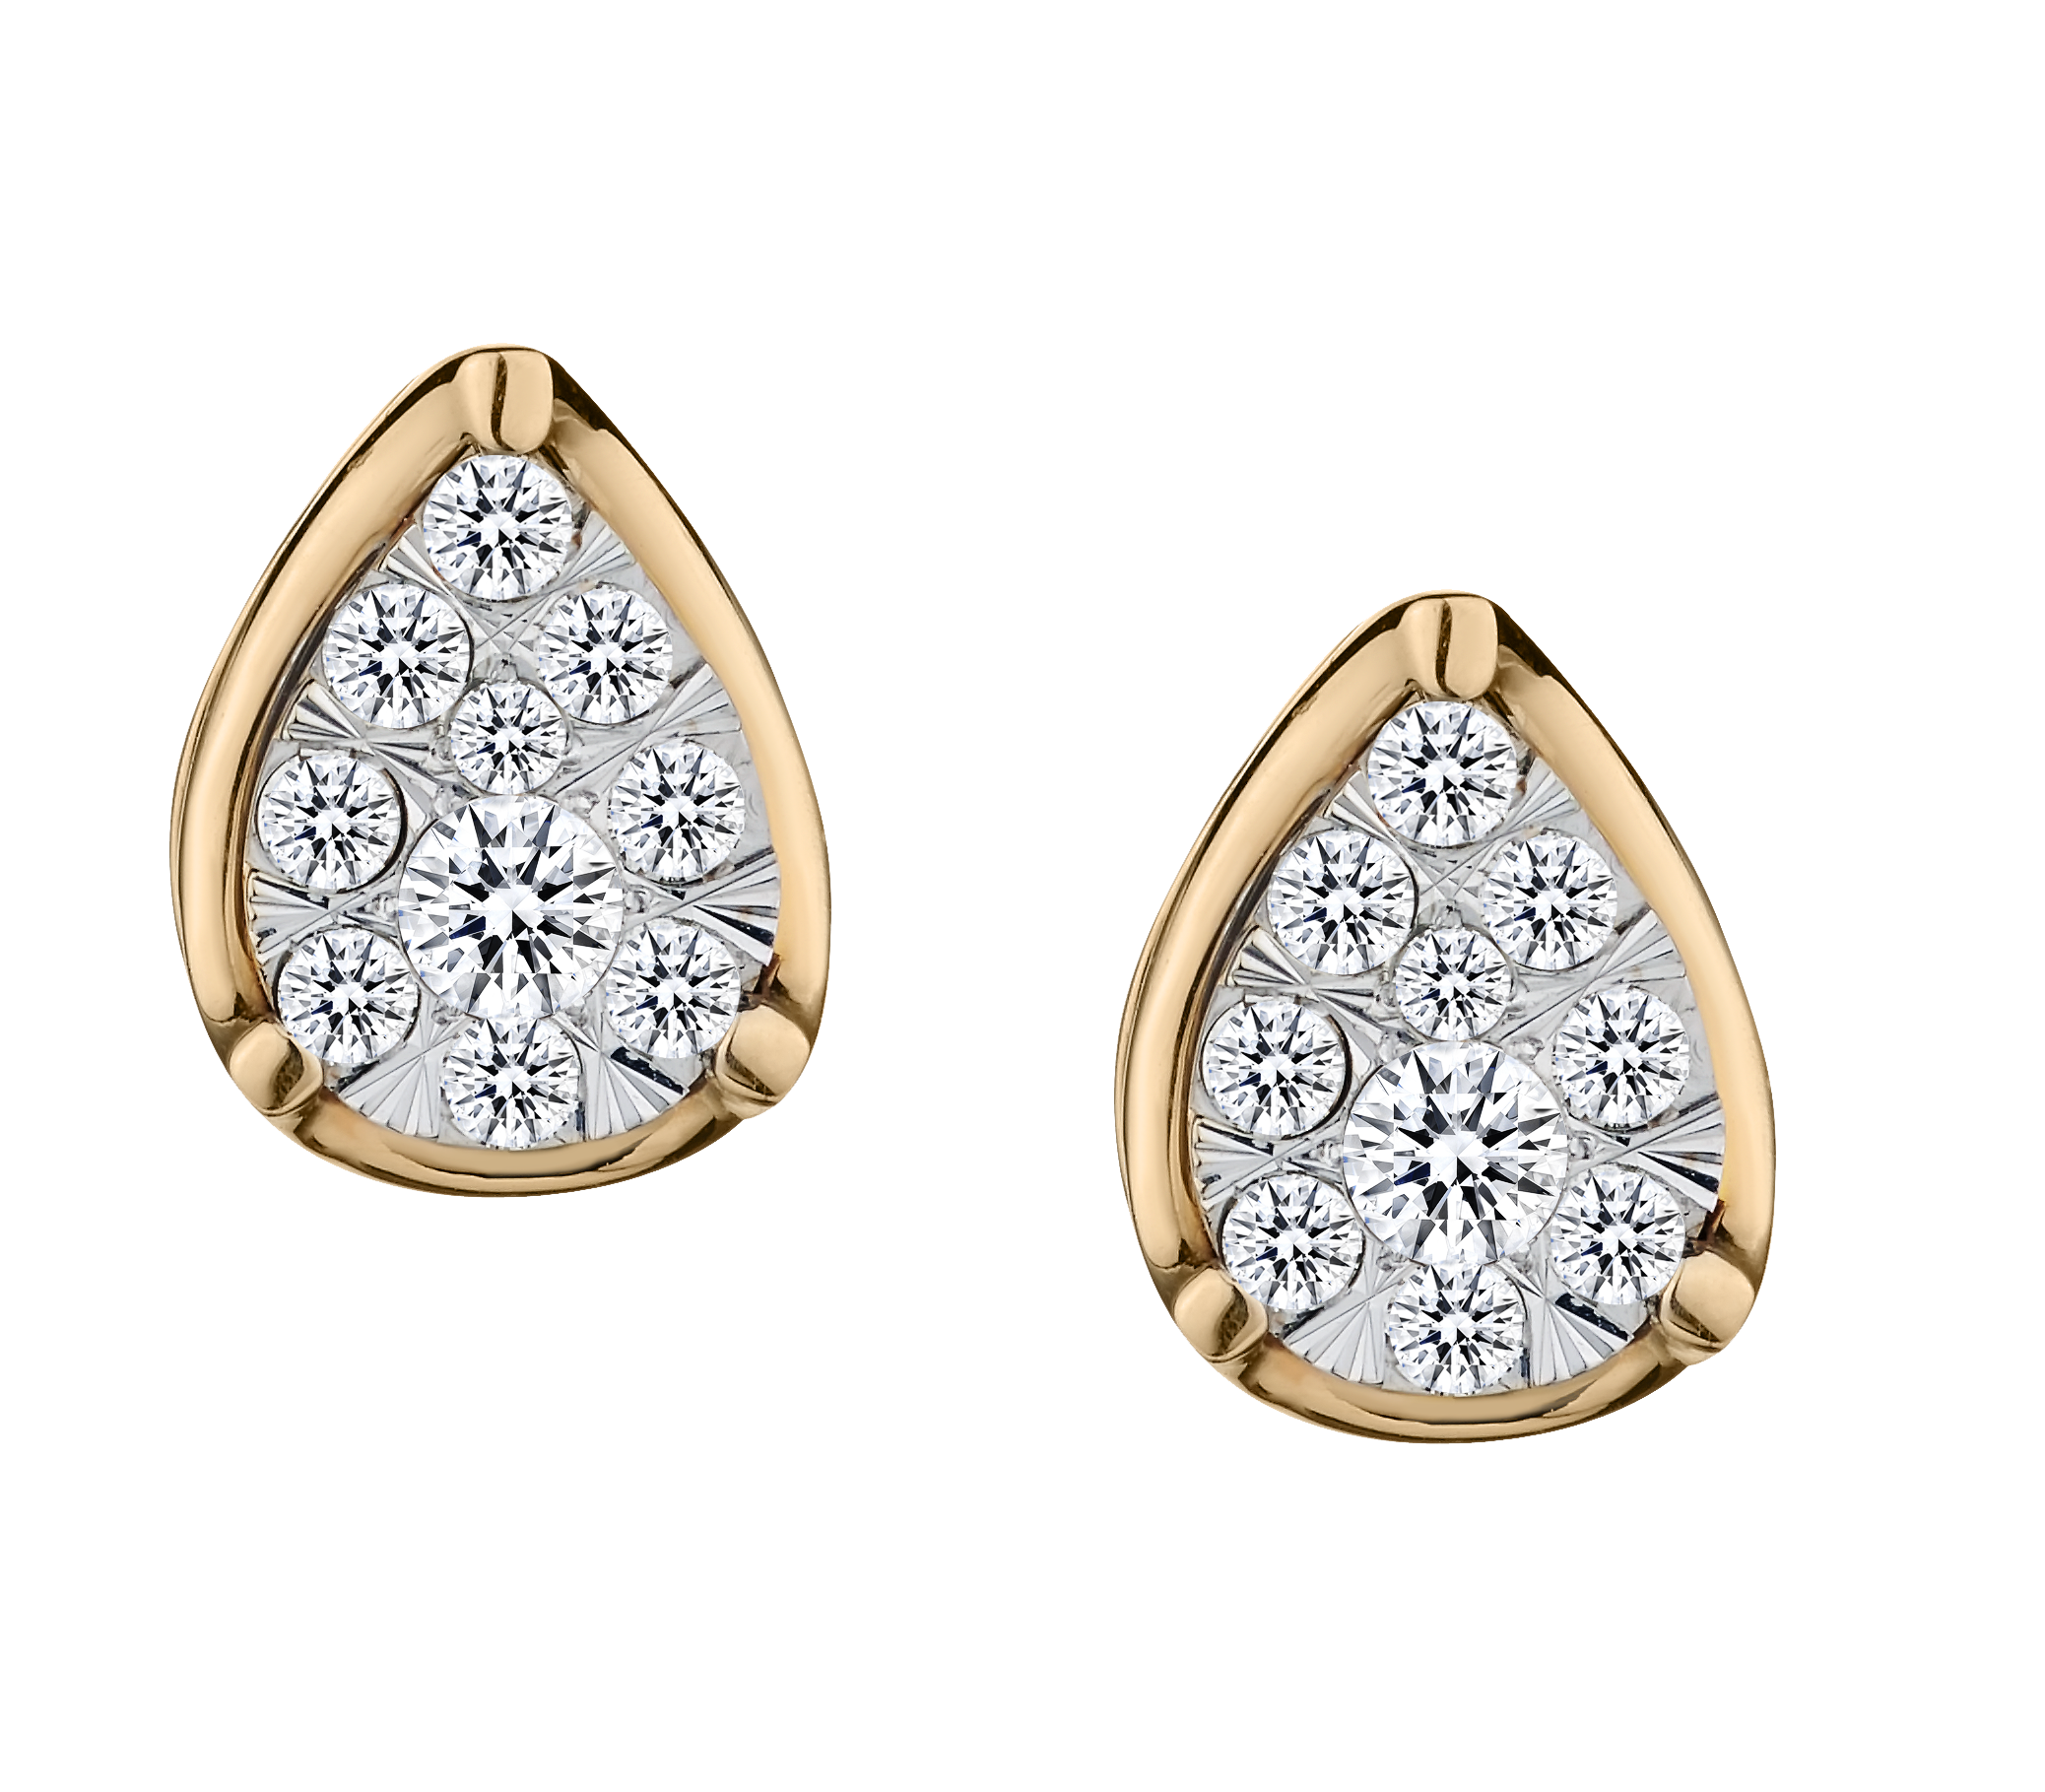 .50 Carat of Diamonds Pear Shaped Pave Earrings, 14kt Two Tone.....................NOW